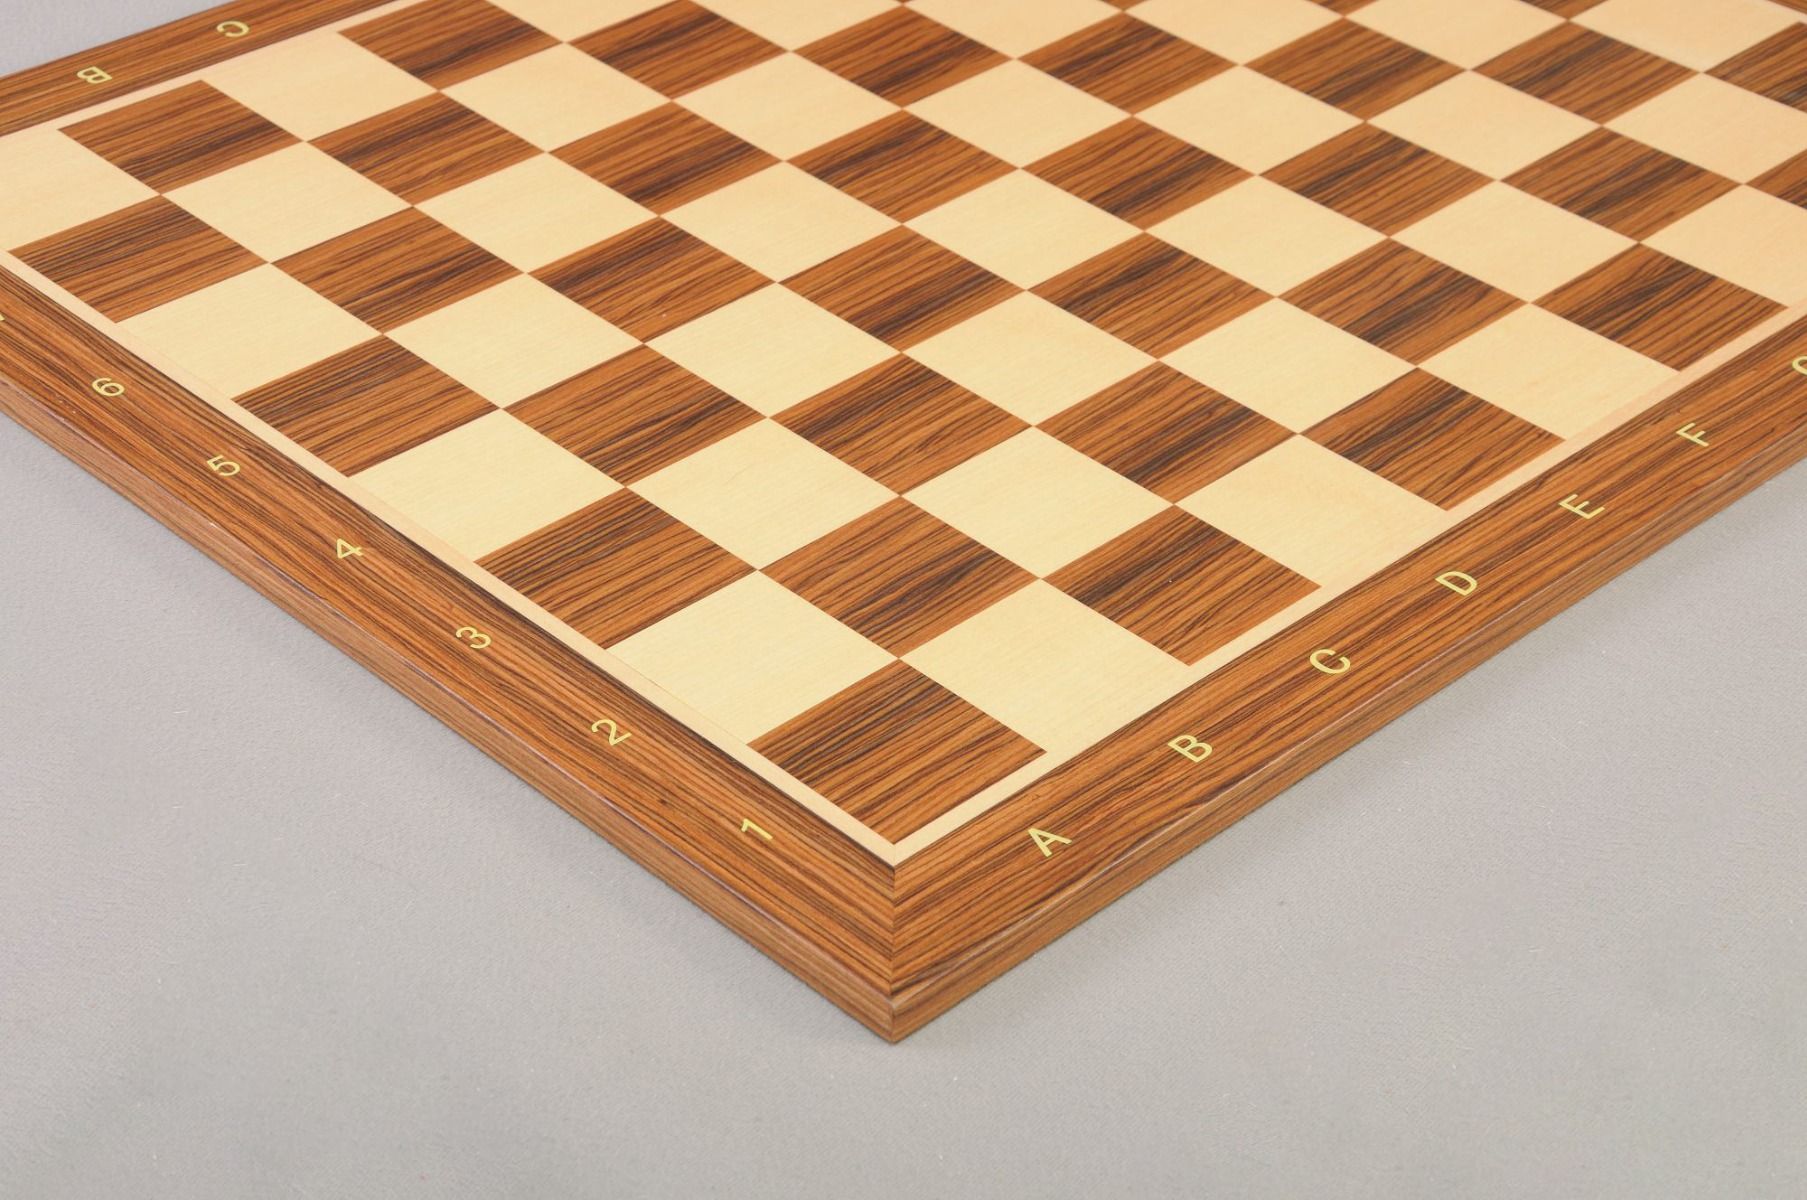 Capablanca Burmese Rosewood Edition Wooden Tournament Chess Board